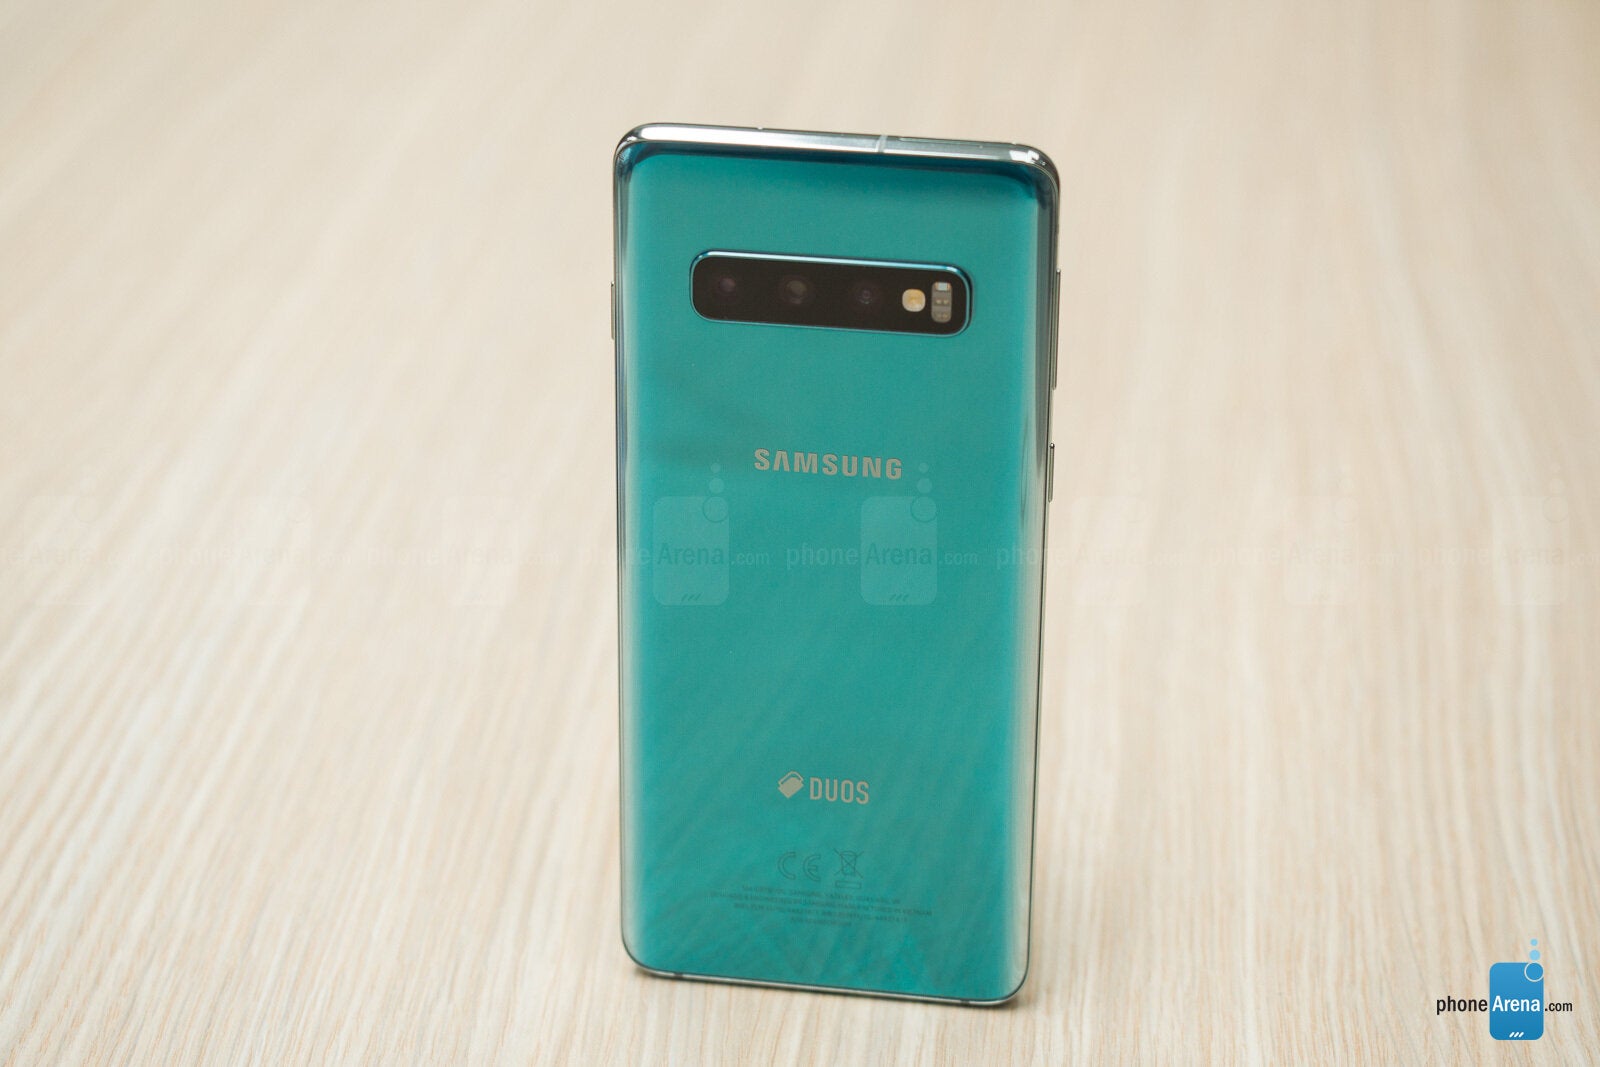 The Samsung Galaxy S10 costs $750 now - Did Samsung decide that the iPhone 11 is not even worth competing with?